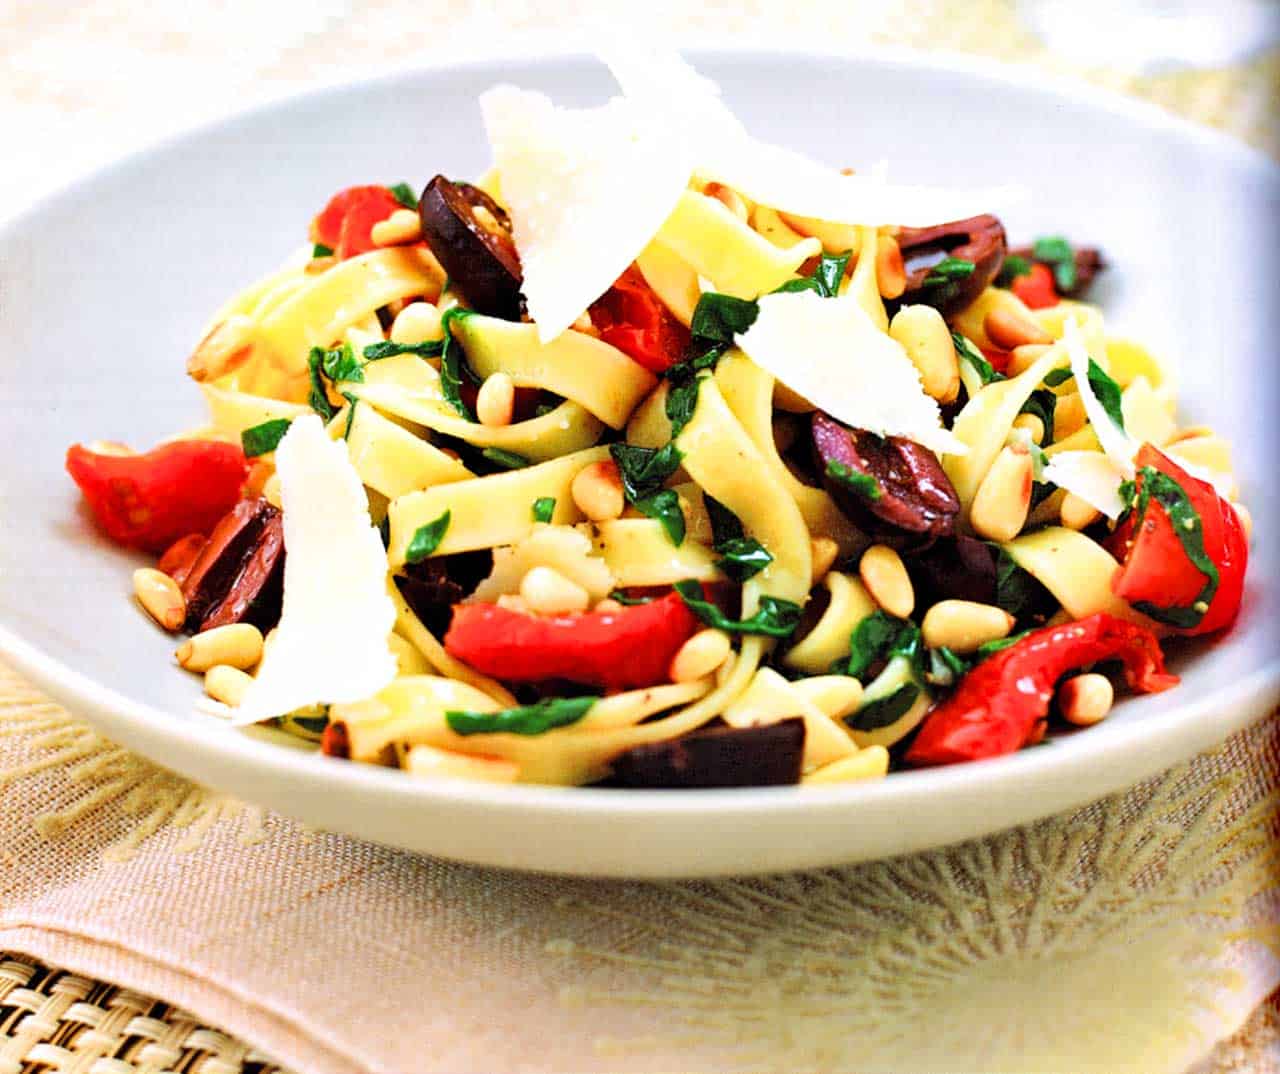 roasted vegetable pasta recipe-Tagliatelle With Sun-Blush Tomatoes And Toasted Pine Nuts